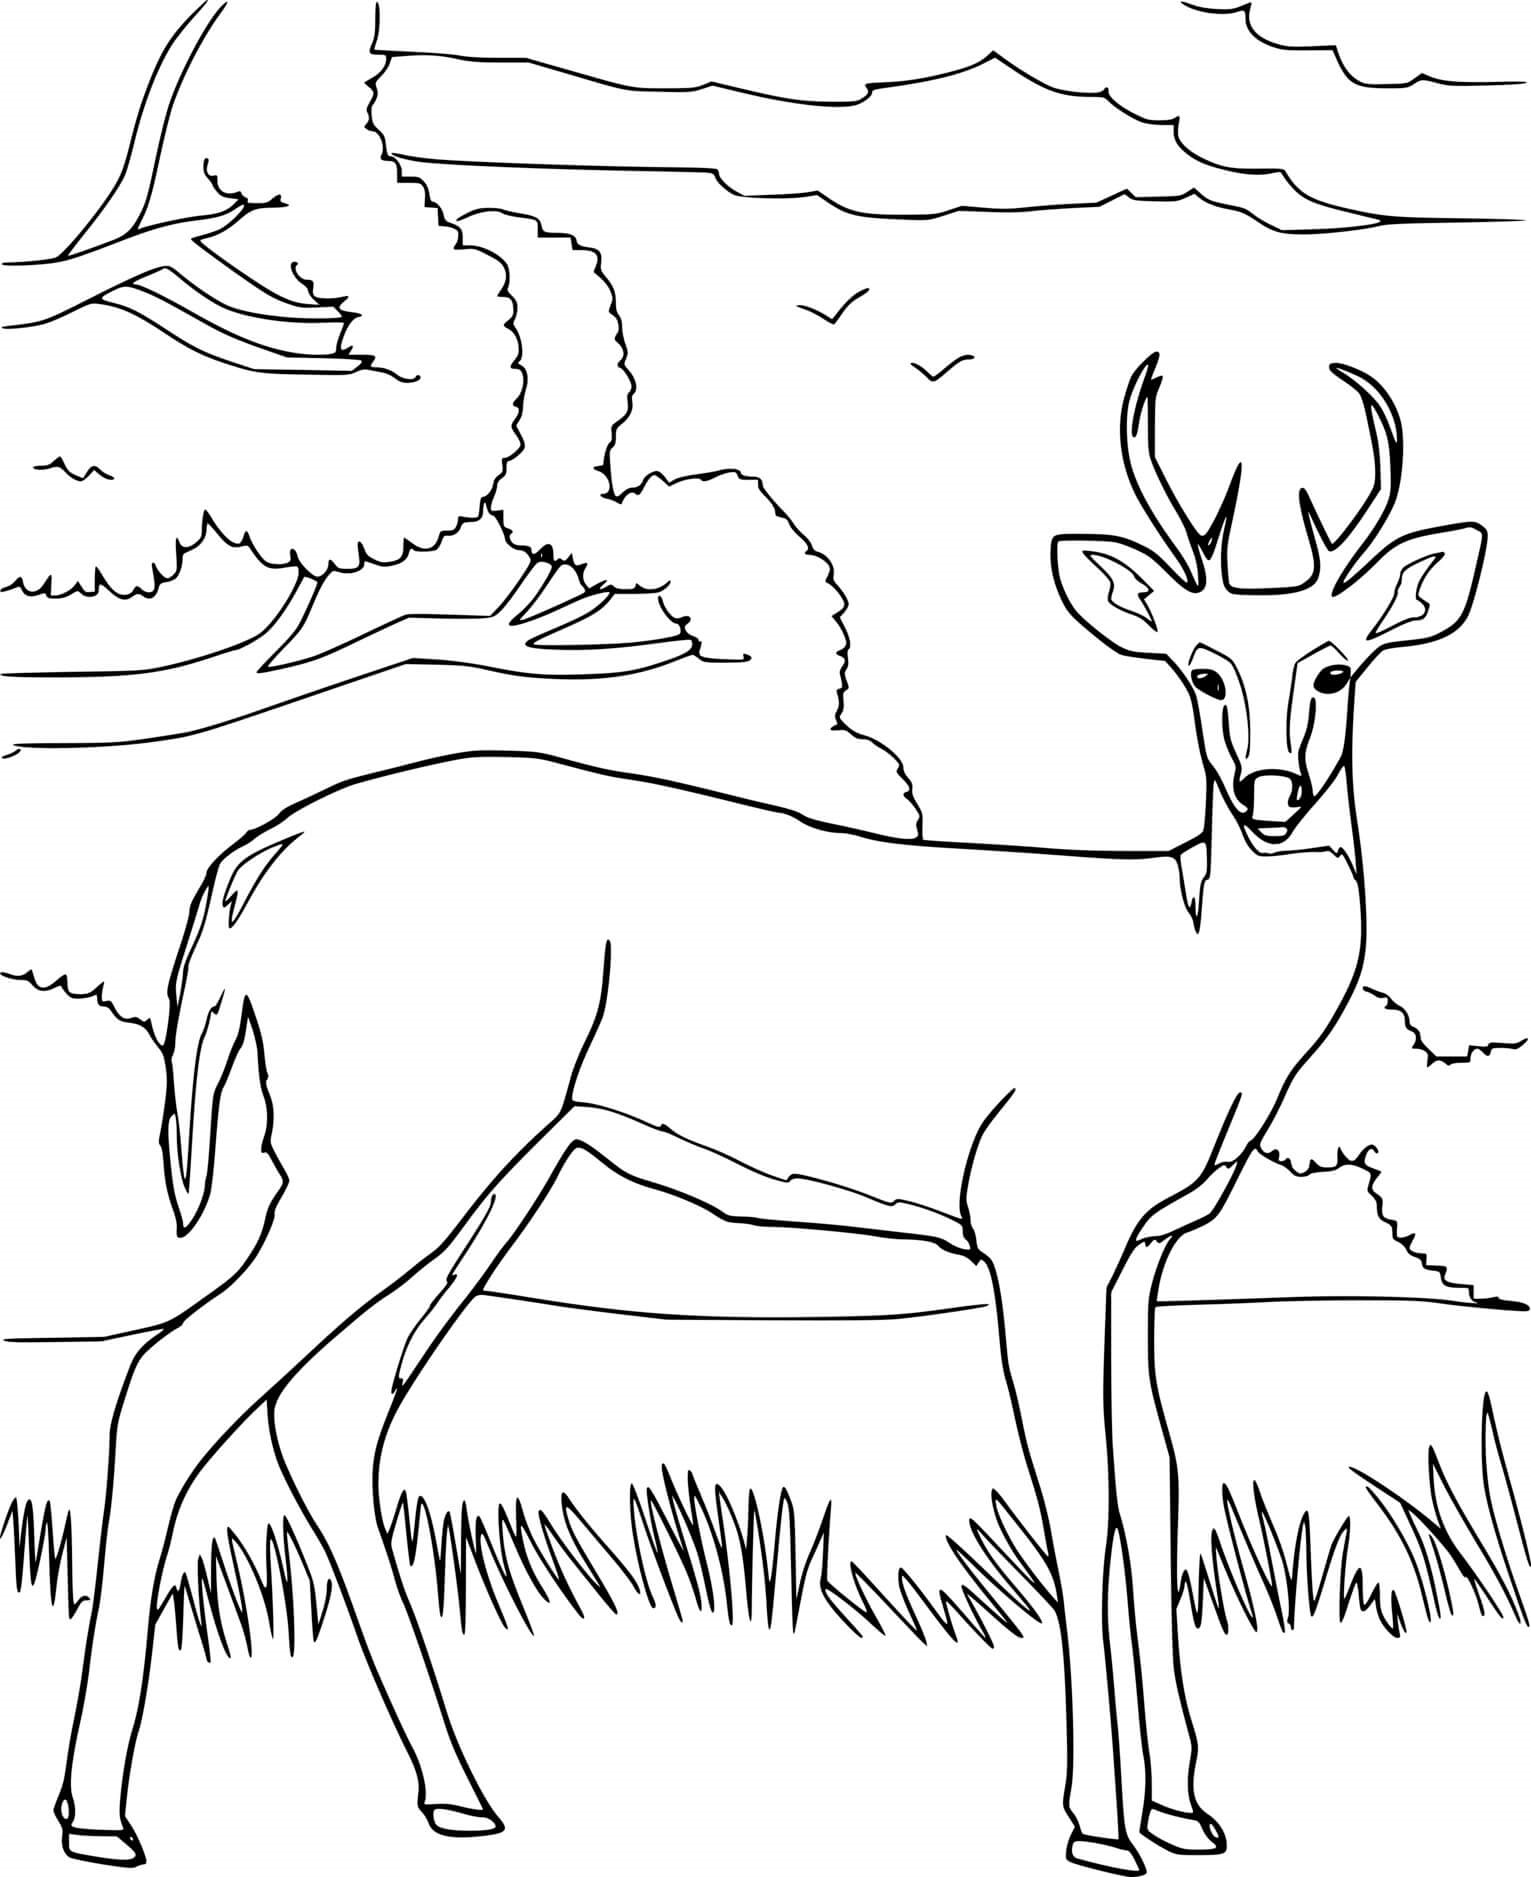 Realistic Deer And Trees Coloring Page